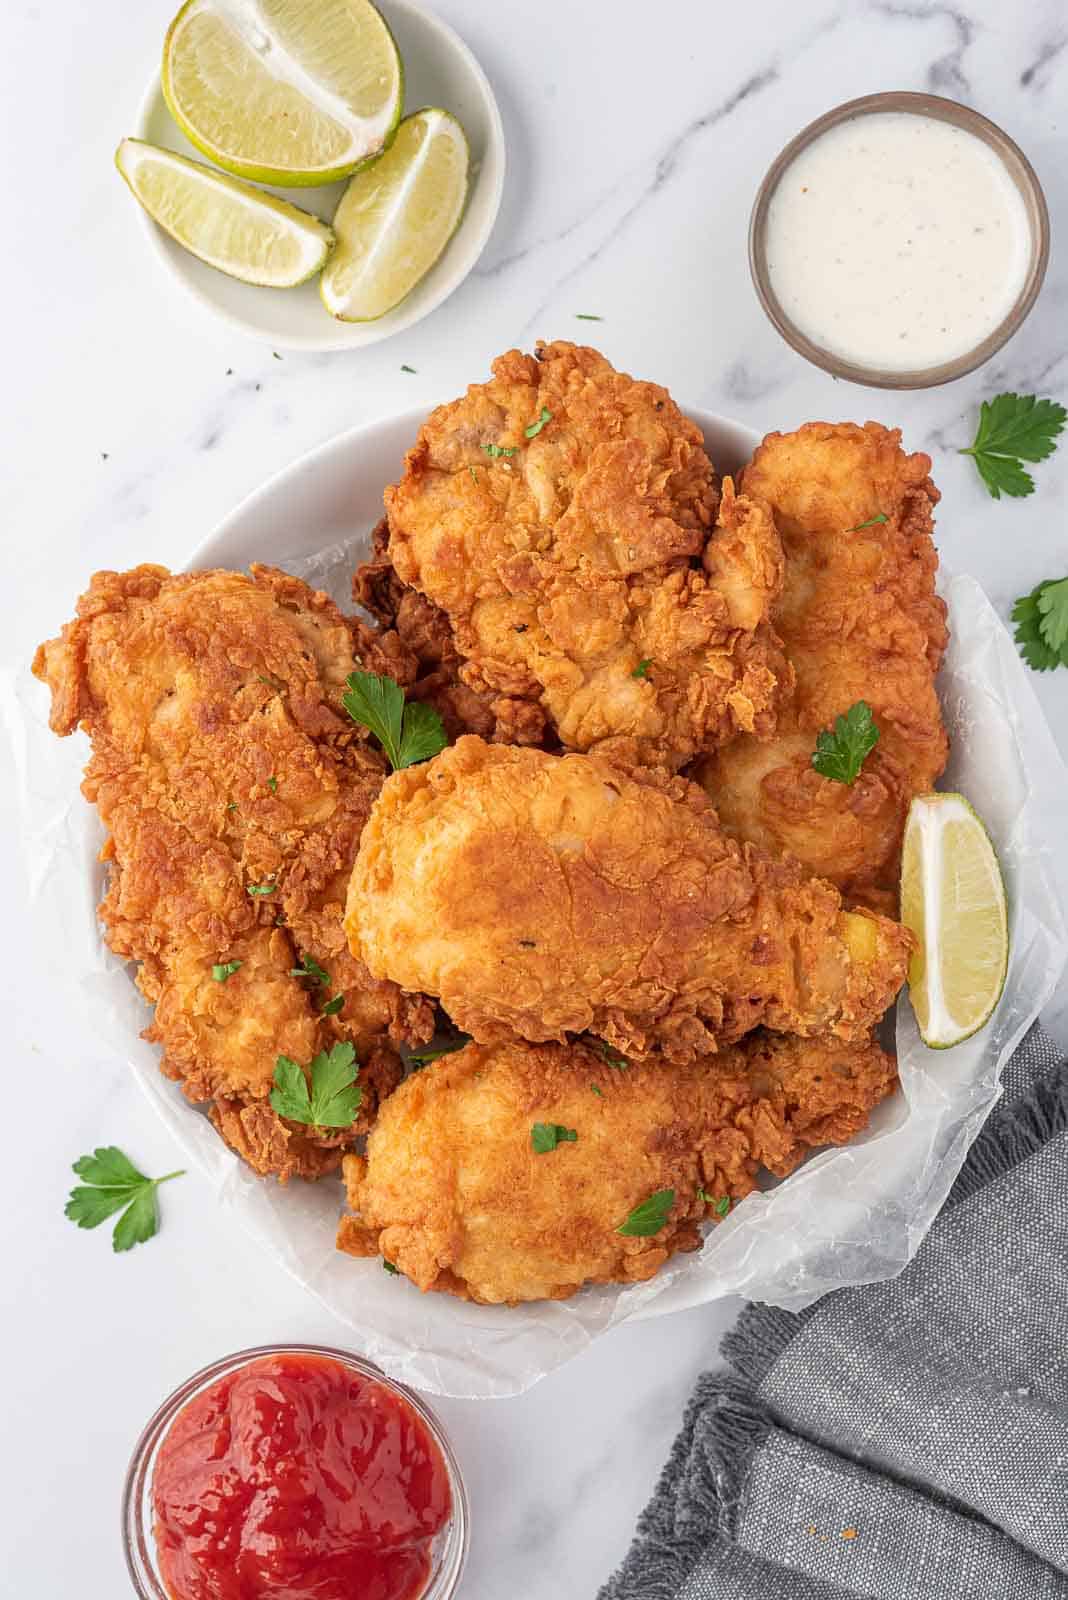 Extra crispy fried chicken on a serving plate.